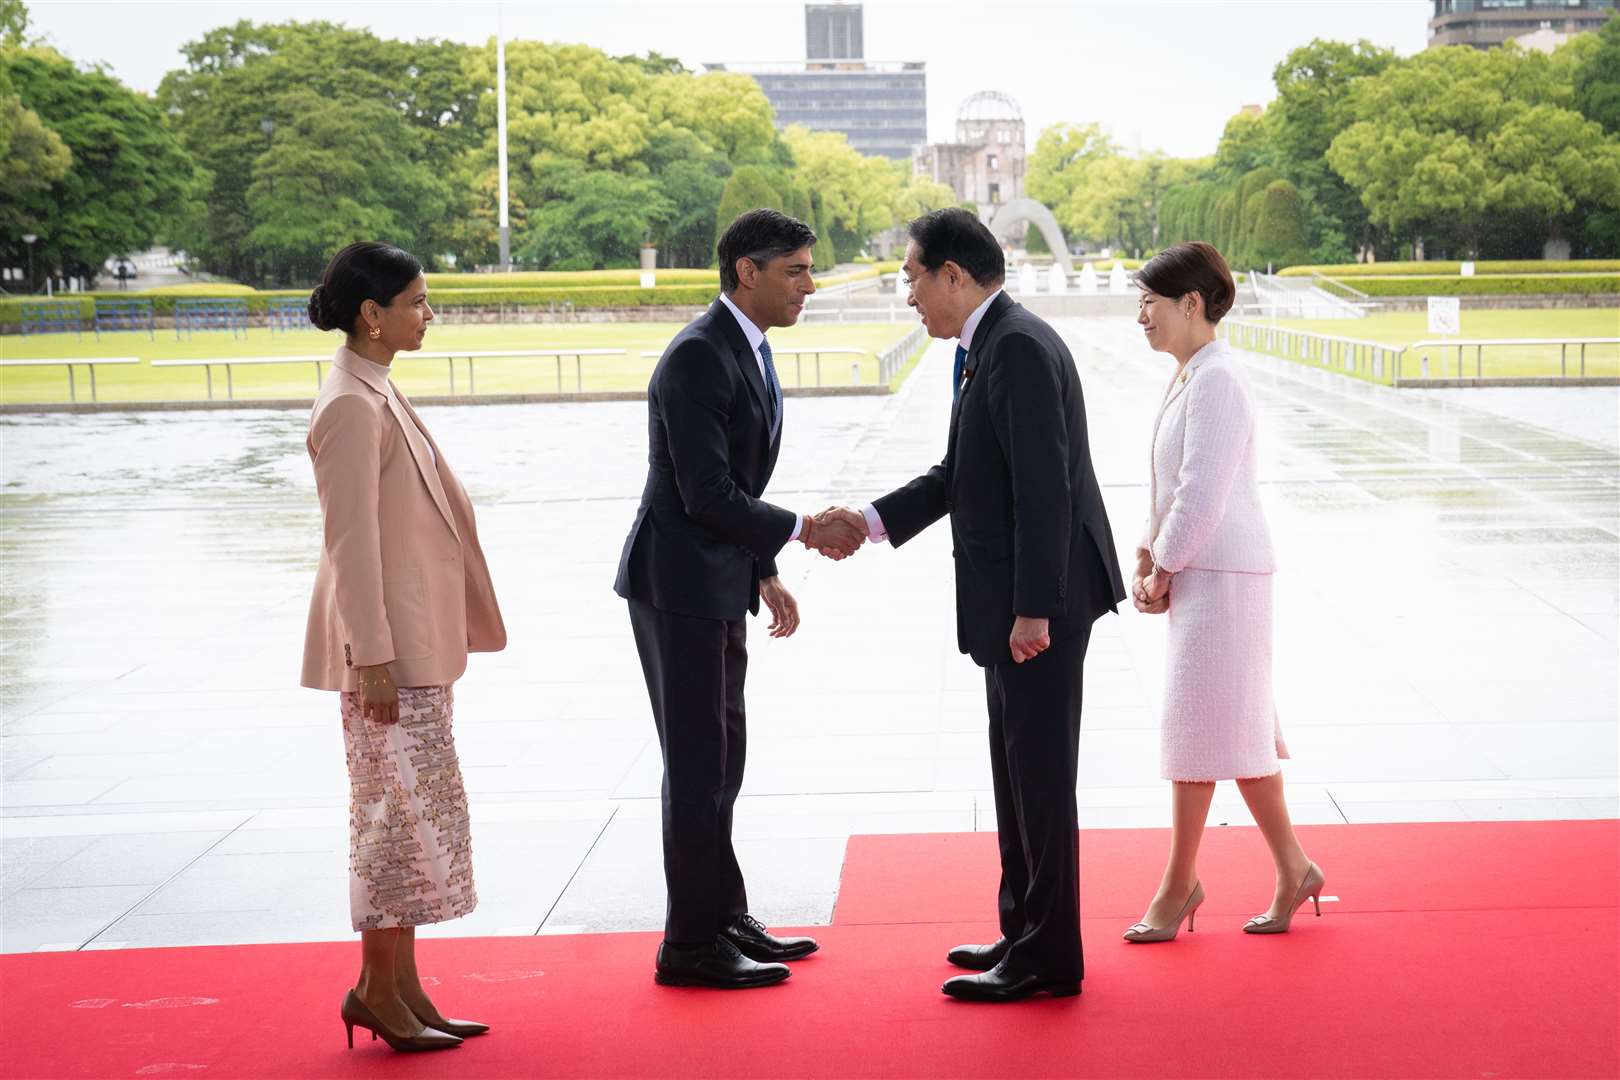 Prime Minister Rishi Sunak and his wife Akshata Murty are welcomed by Japan’s Prime Minister Fumio Kishida and his wife Yuko Kishida at the Peace Memorial Park during the G7 Summit in Hiroshima (Stefan Rousseau/PA)